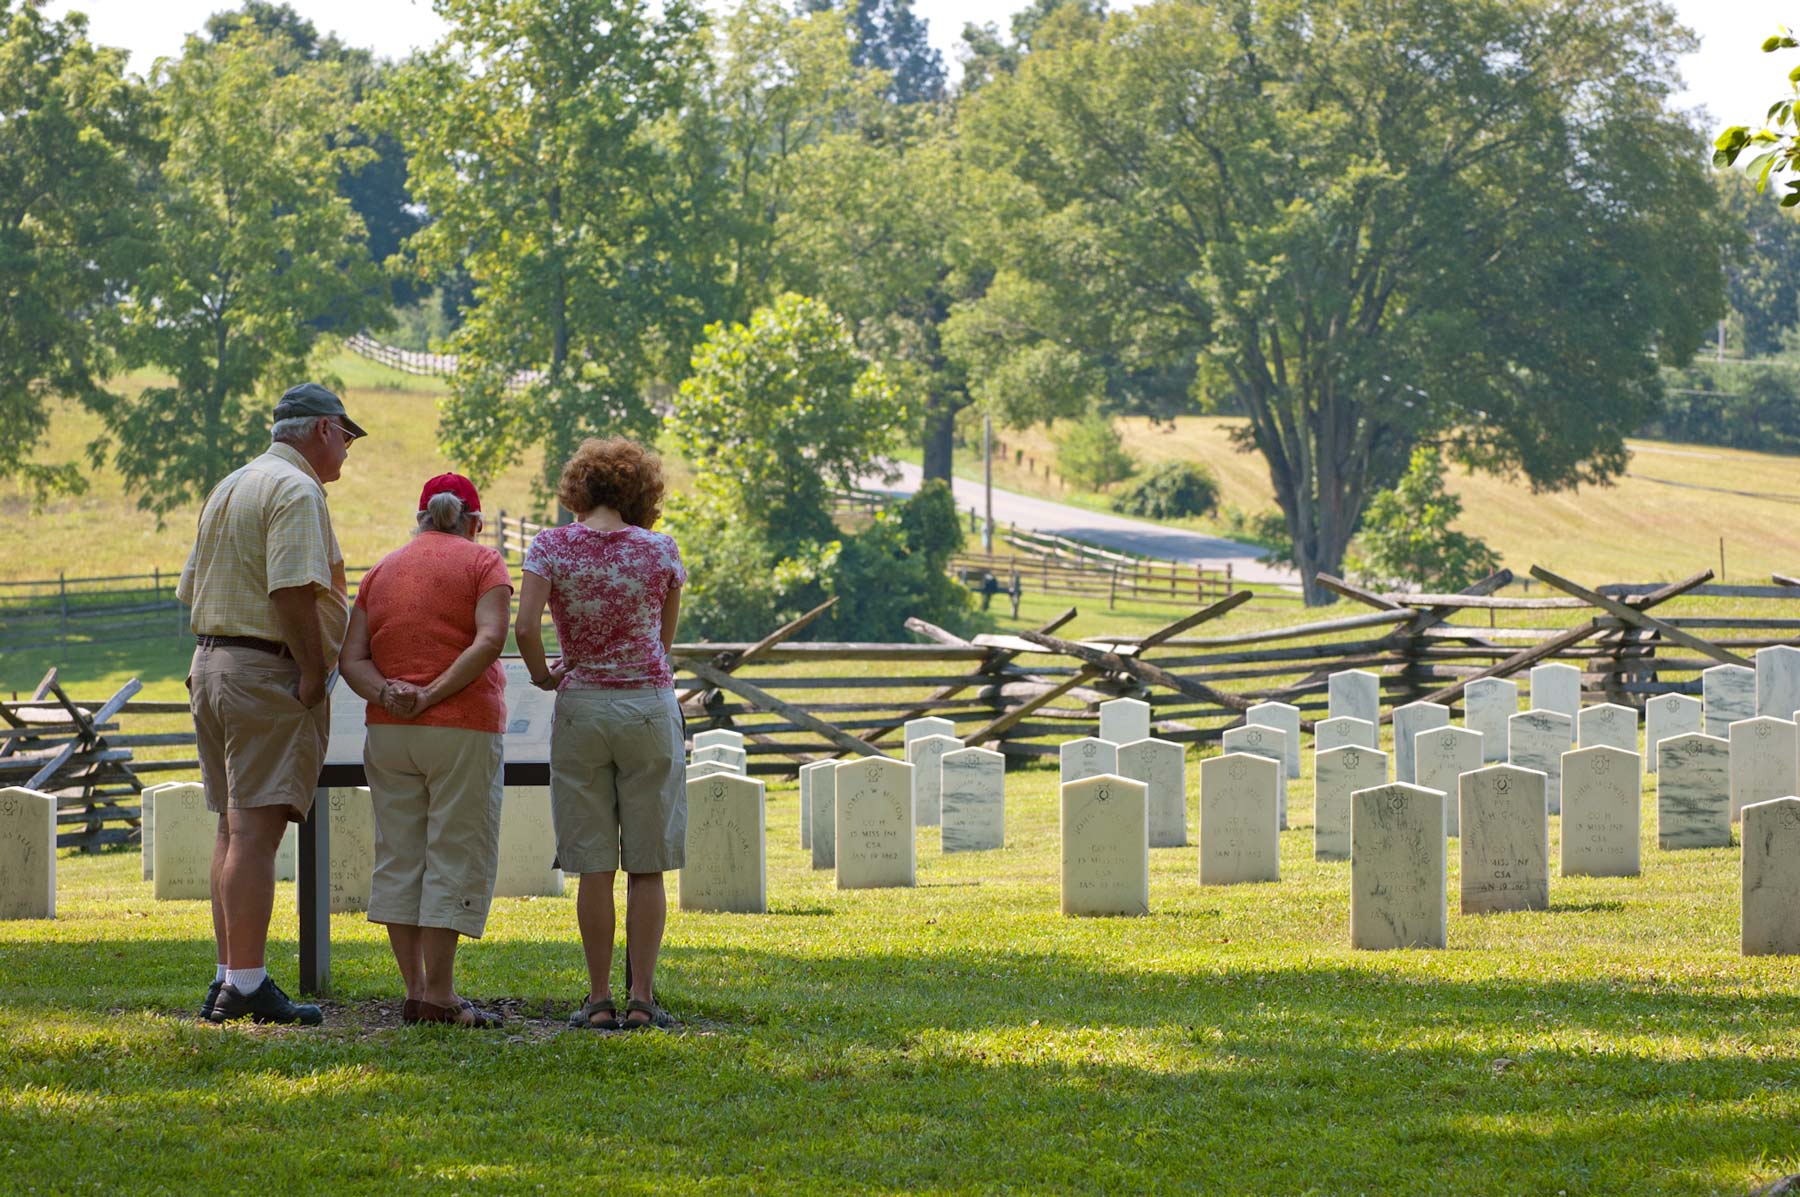 People paying their respect at the Mill Springs Battlefield cementery.